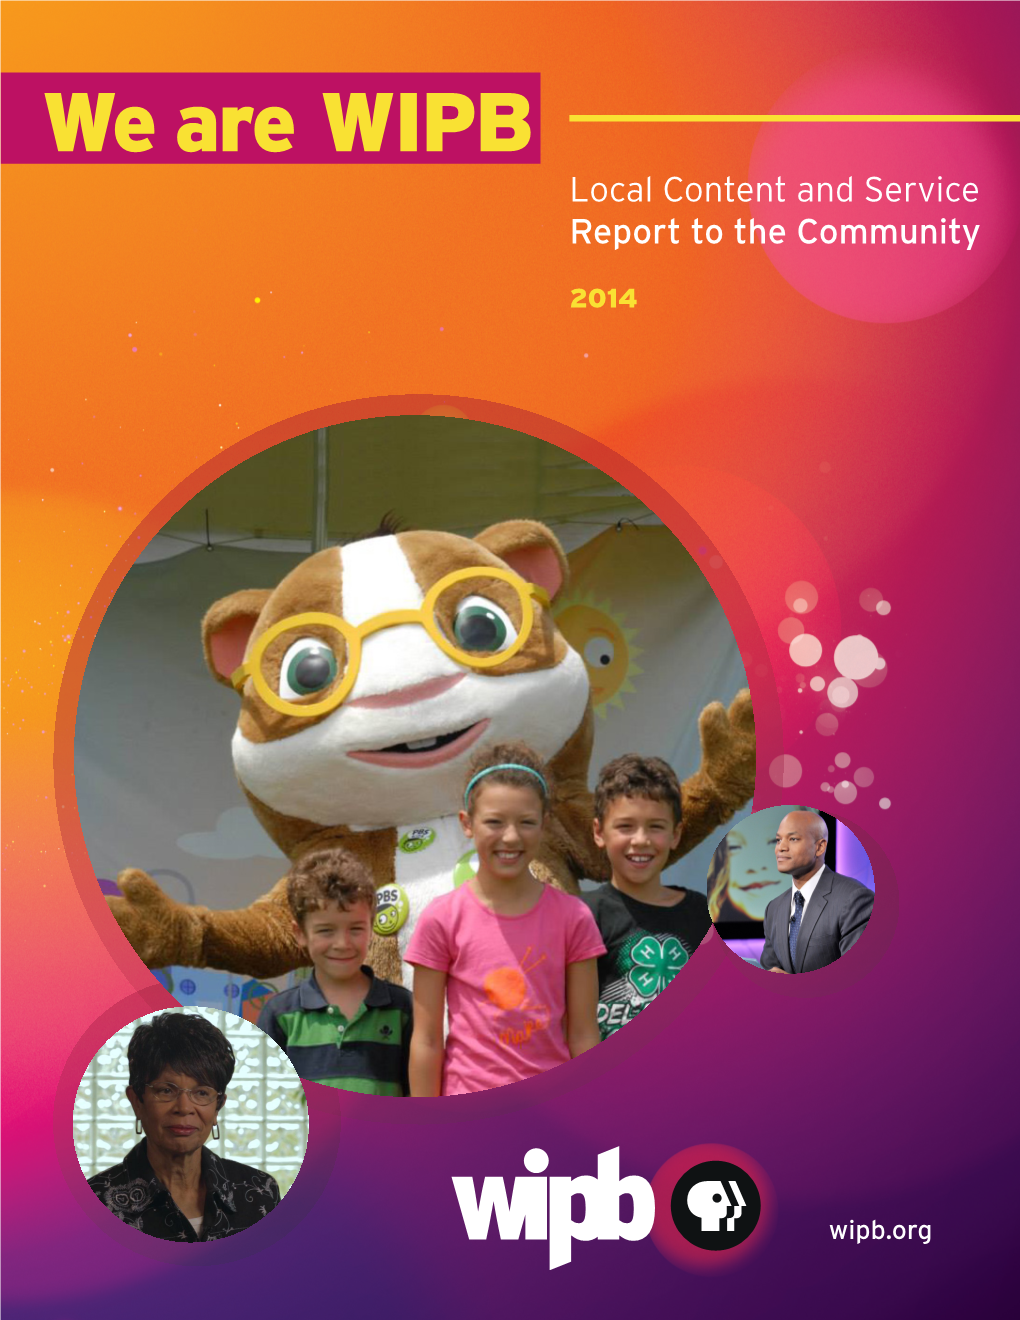 We Are WIPB Local Content and Service Report to the Community